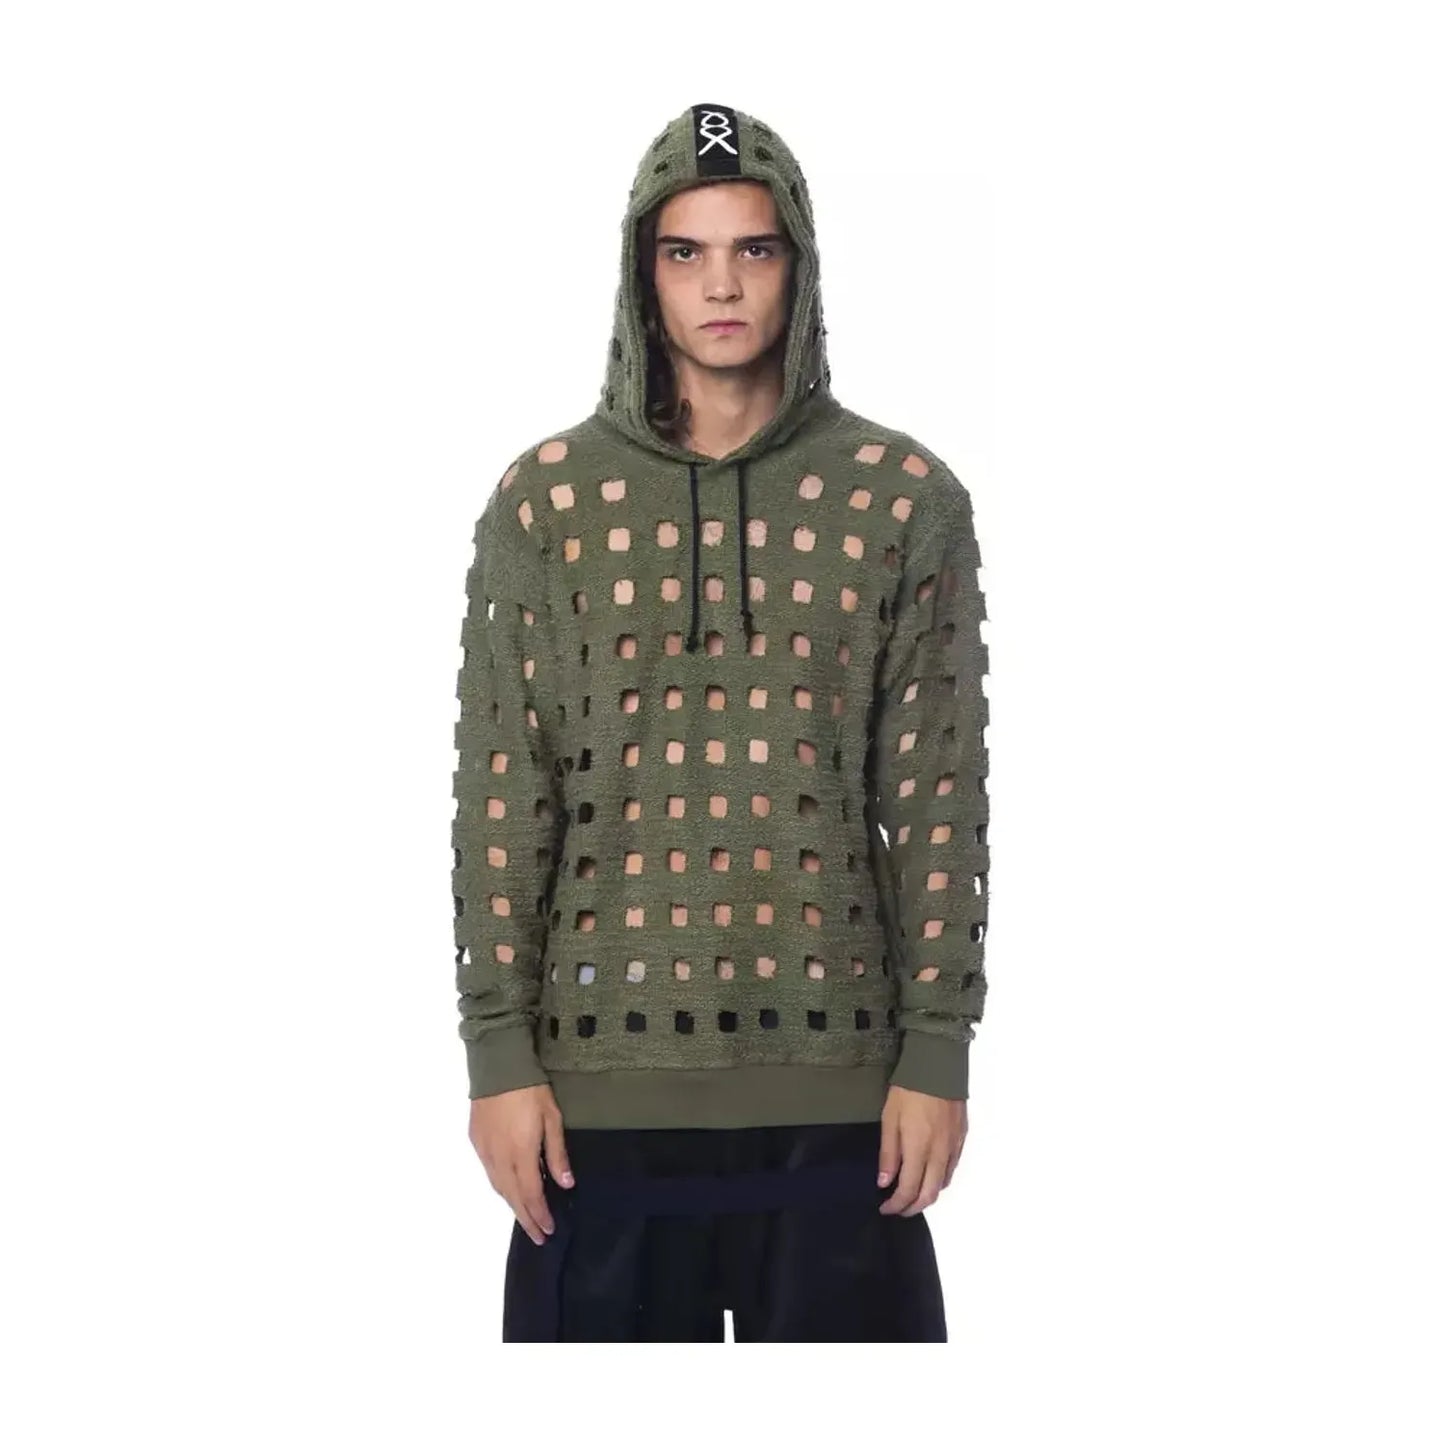 Nicolo Tonetto Army Perforated Cotton Hoodie - Casual Elegance army-sweater stock_product_image_12991_1519829661-14-ebd9e7bc-e5a.webp